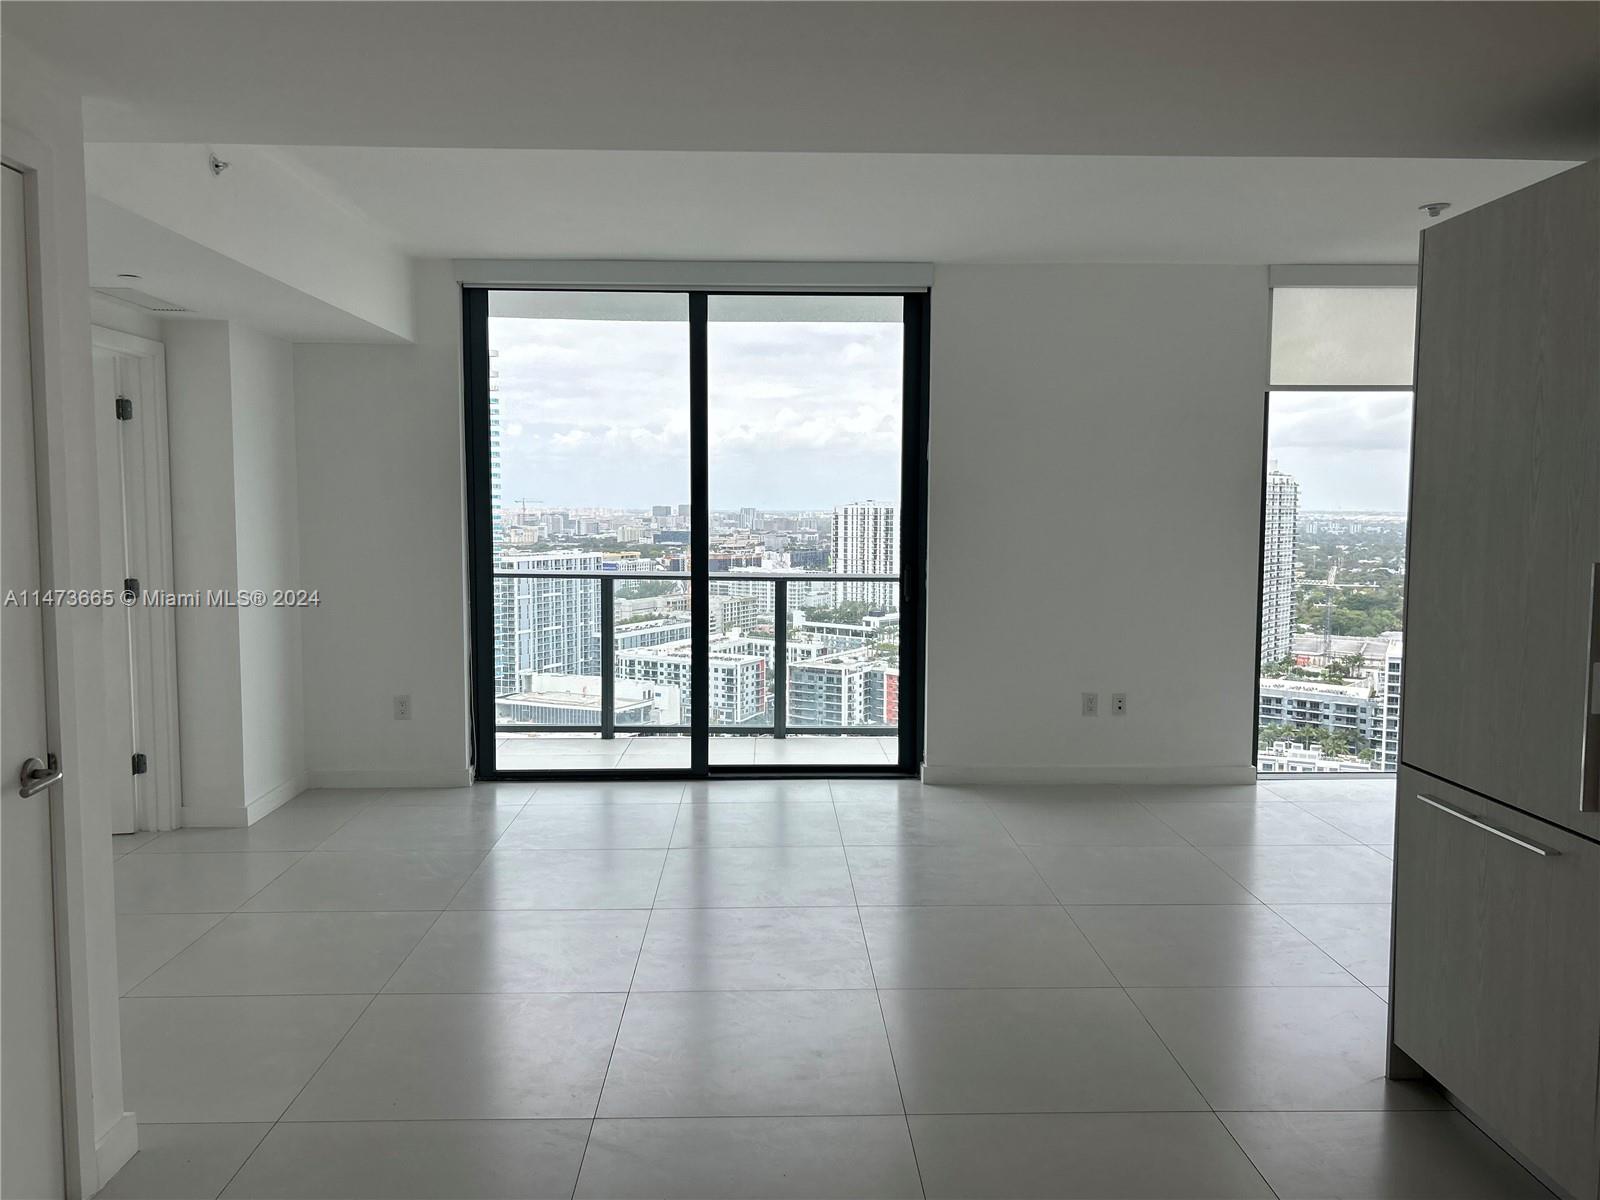 Enjoy this beautiful 2 bedroom 2 bathroom with amazing views to Midtown and Wynwood, with luxurious finishes, tile floor and top of the line open kitchen. Centrally located closed to downtown, airport, Coral Gables, Coconut Grove and Miami Beach. With world class amenities, rooftop pool, 24 hours front desk, security, club room, kids room, sauna, theater, fitness center, tennis court, valet parking and much more.